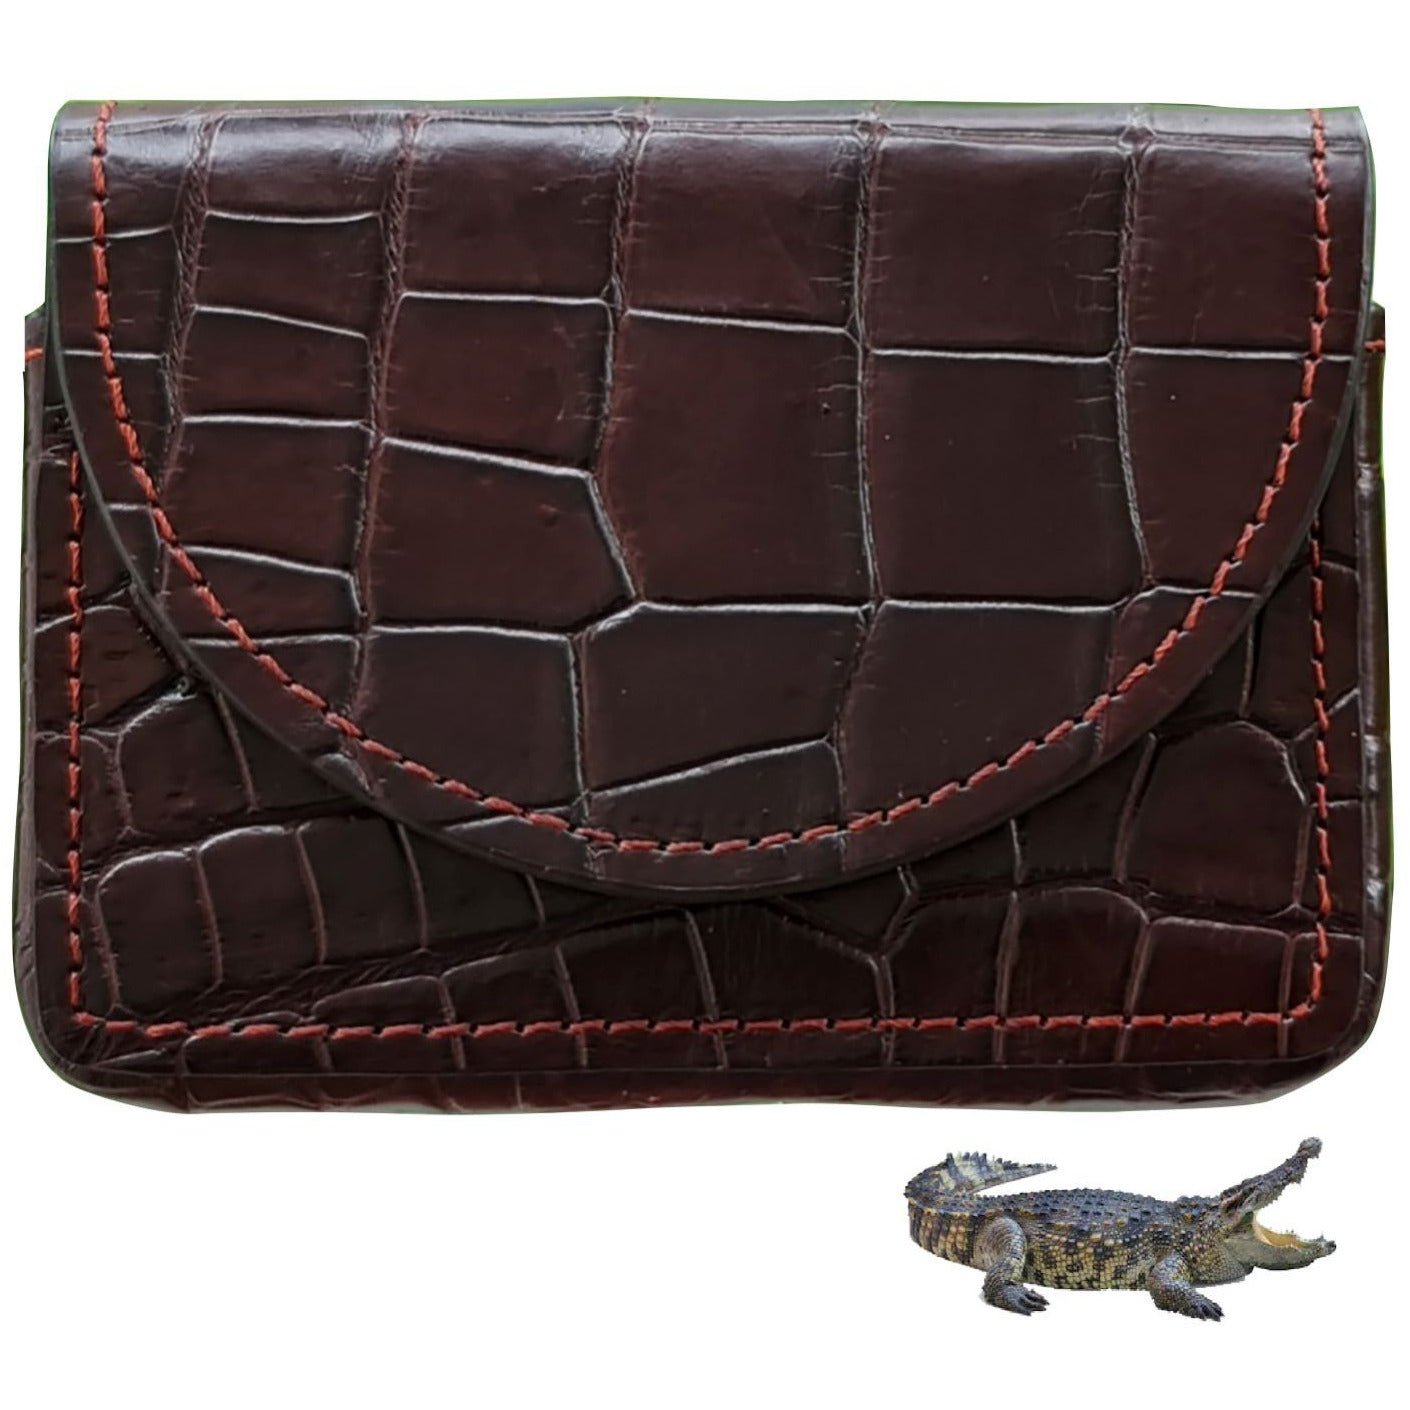 Leather Business Card Holder, Classic Croc